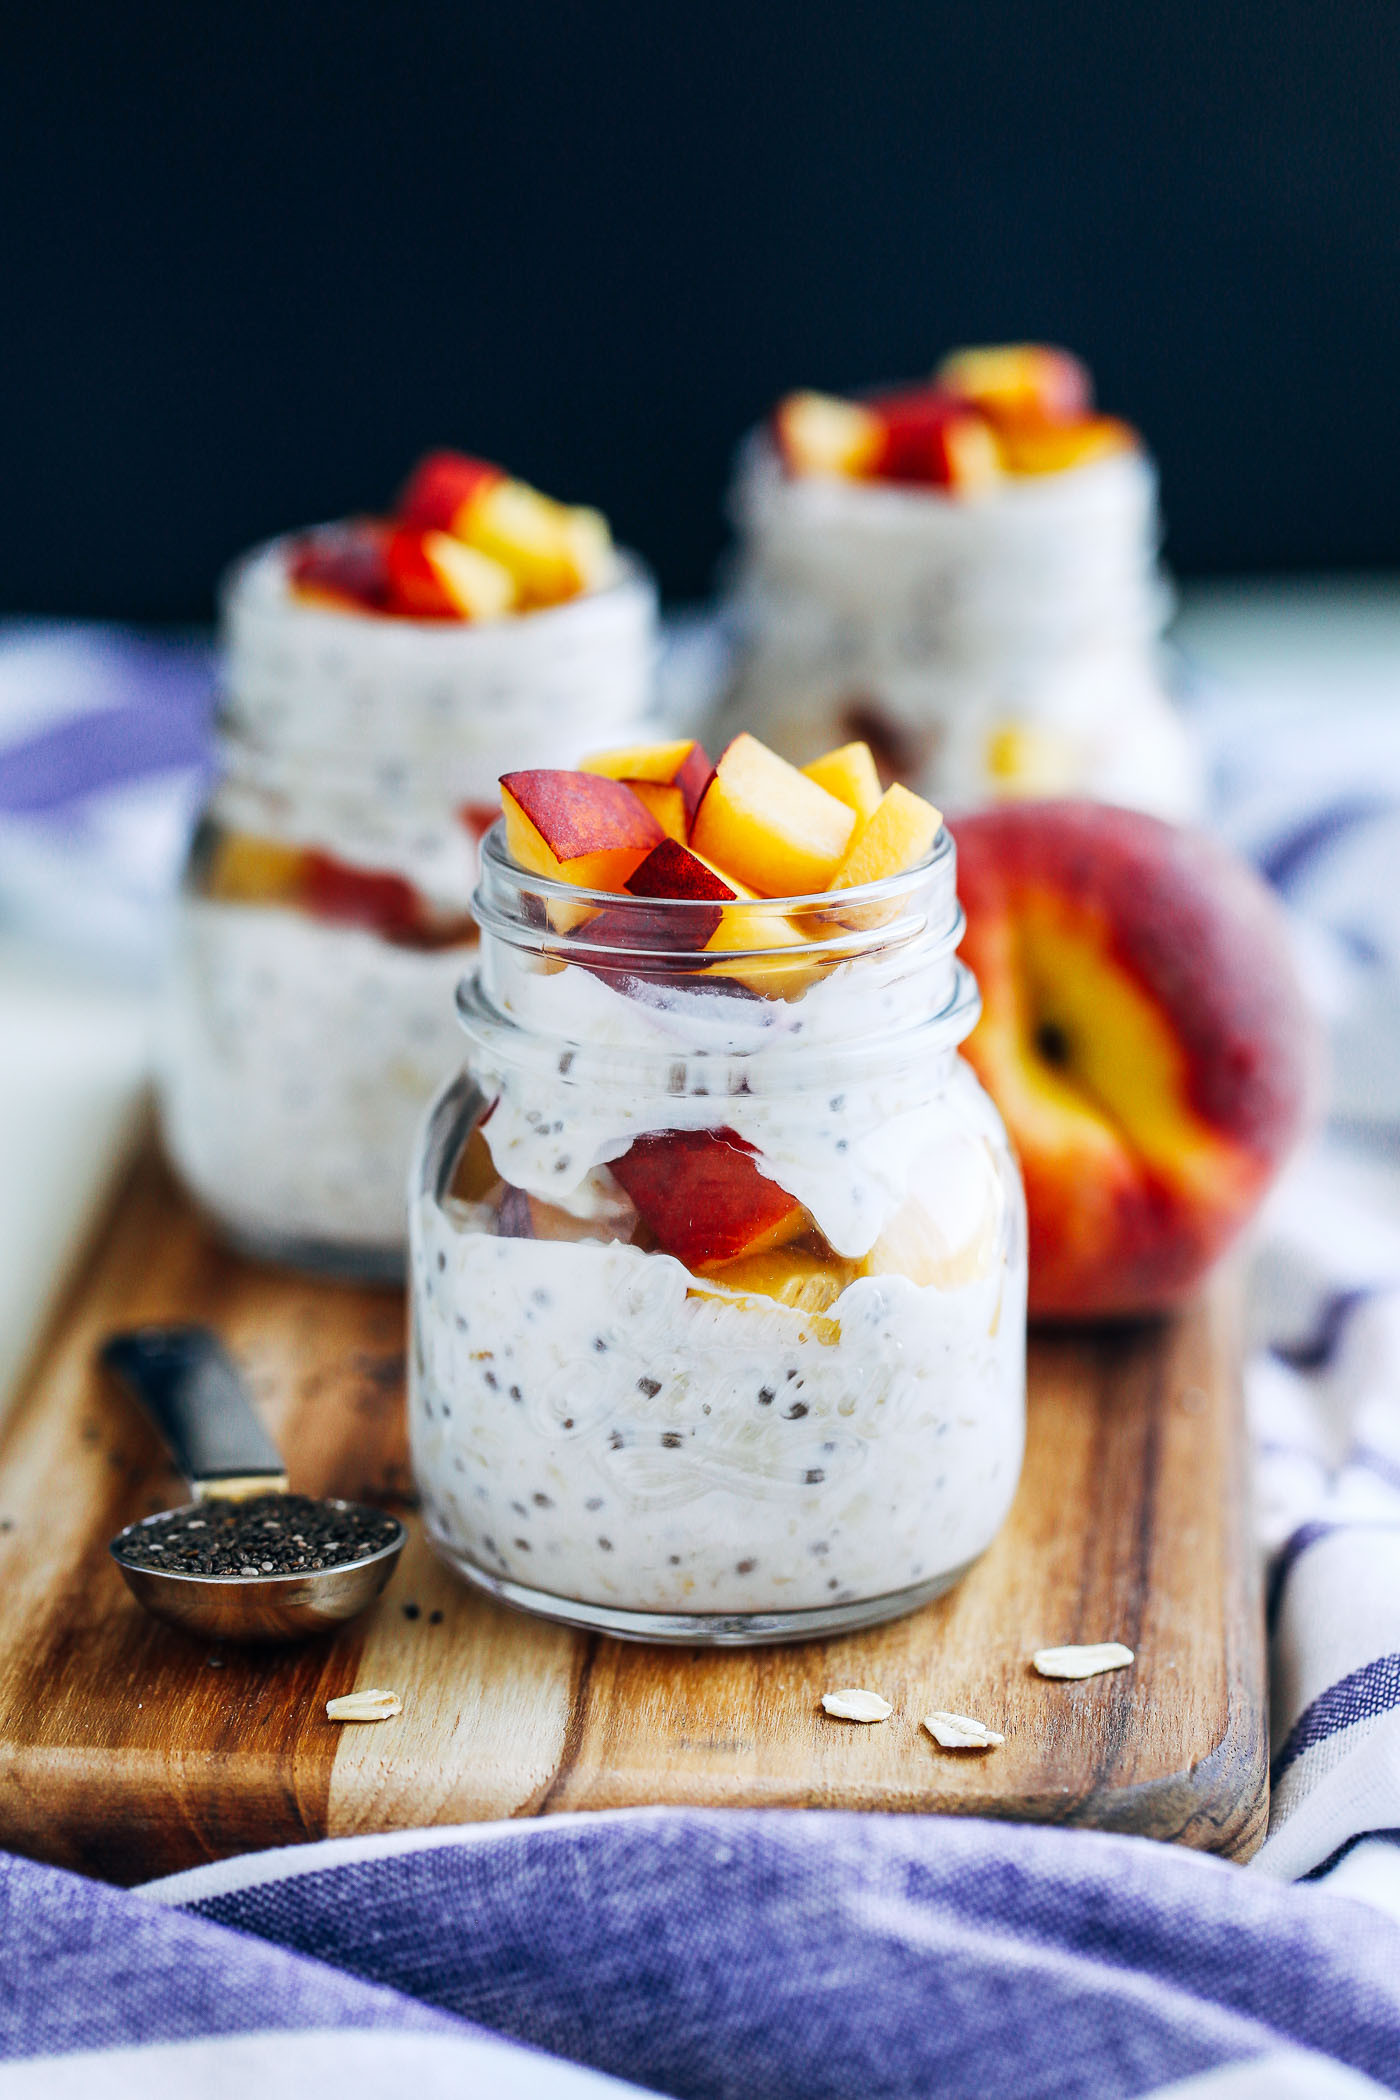 Healthy Oats Breakfast
 Overnight Peaches and Cream Chia Seed Oats Making Thyme